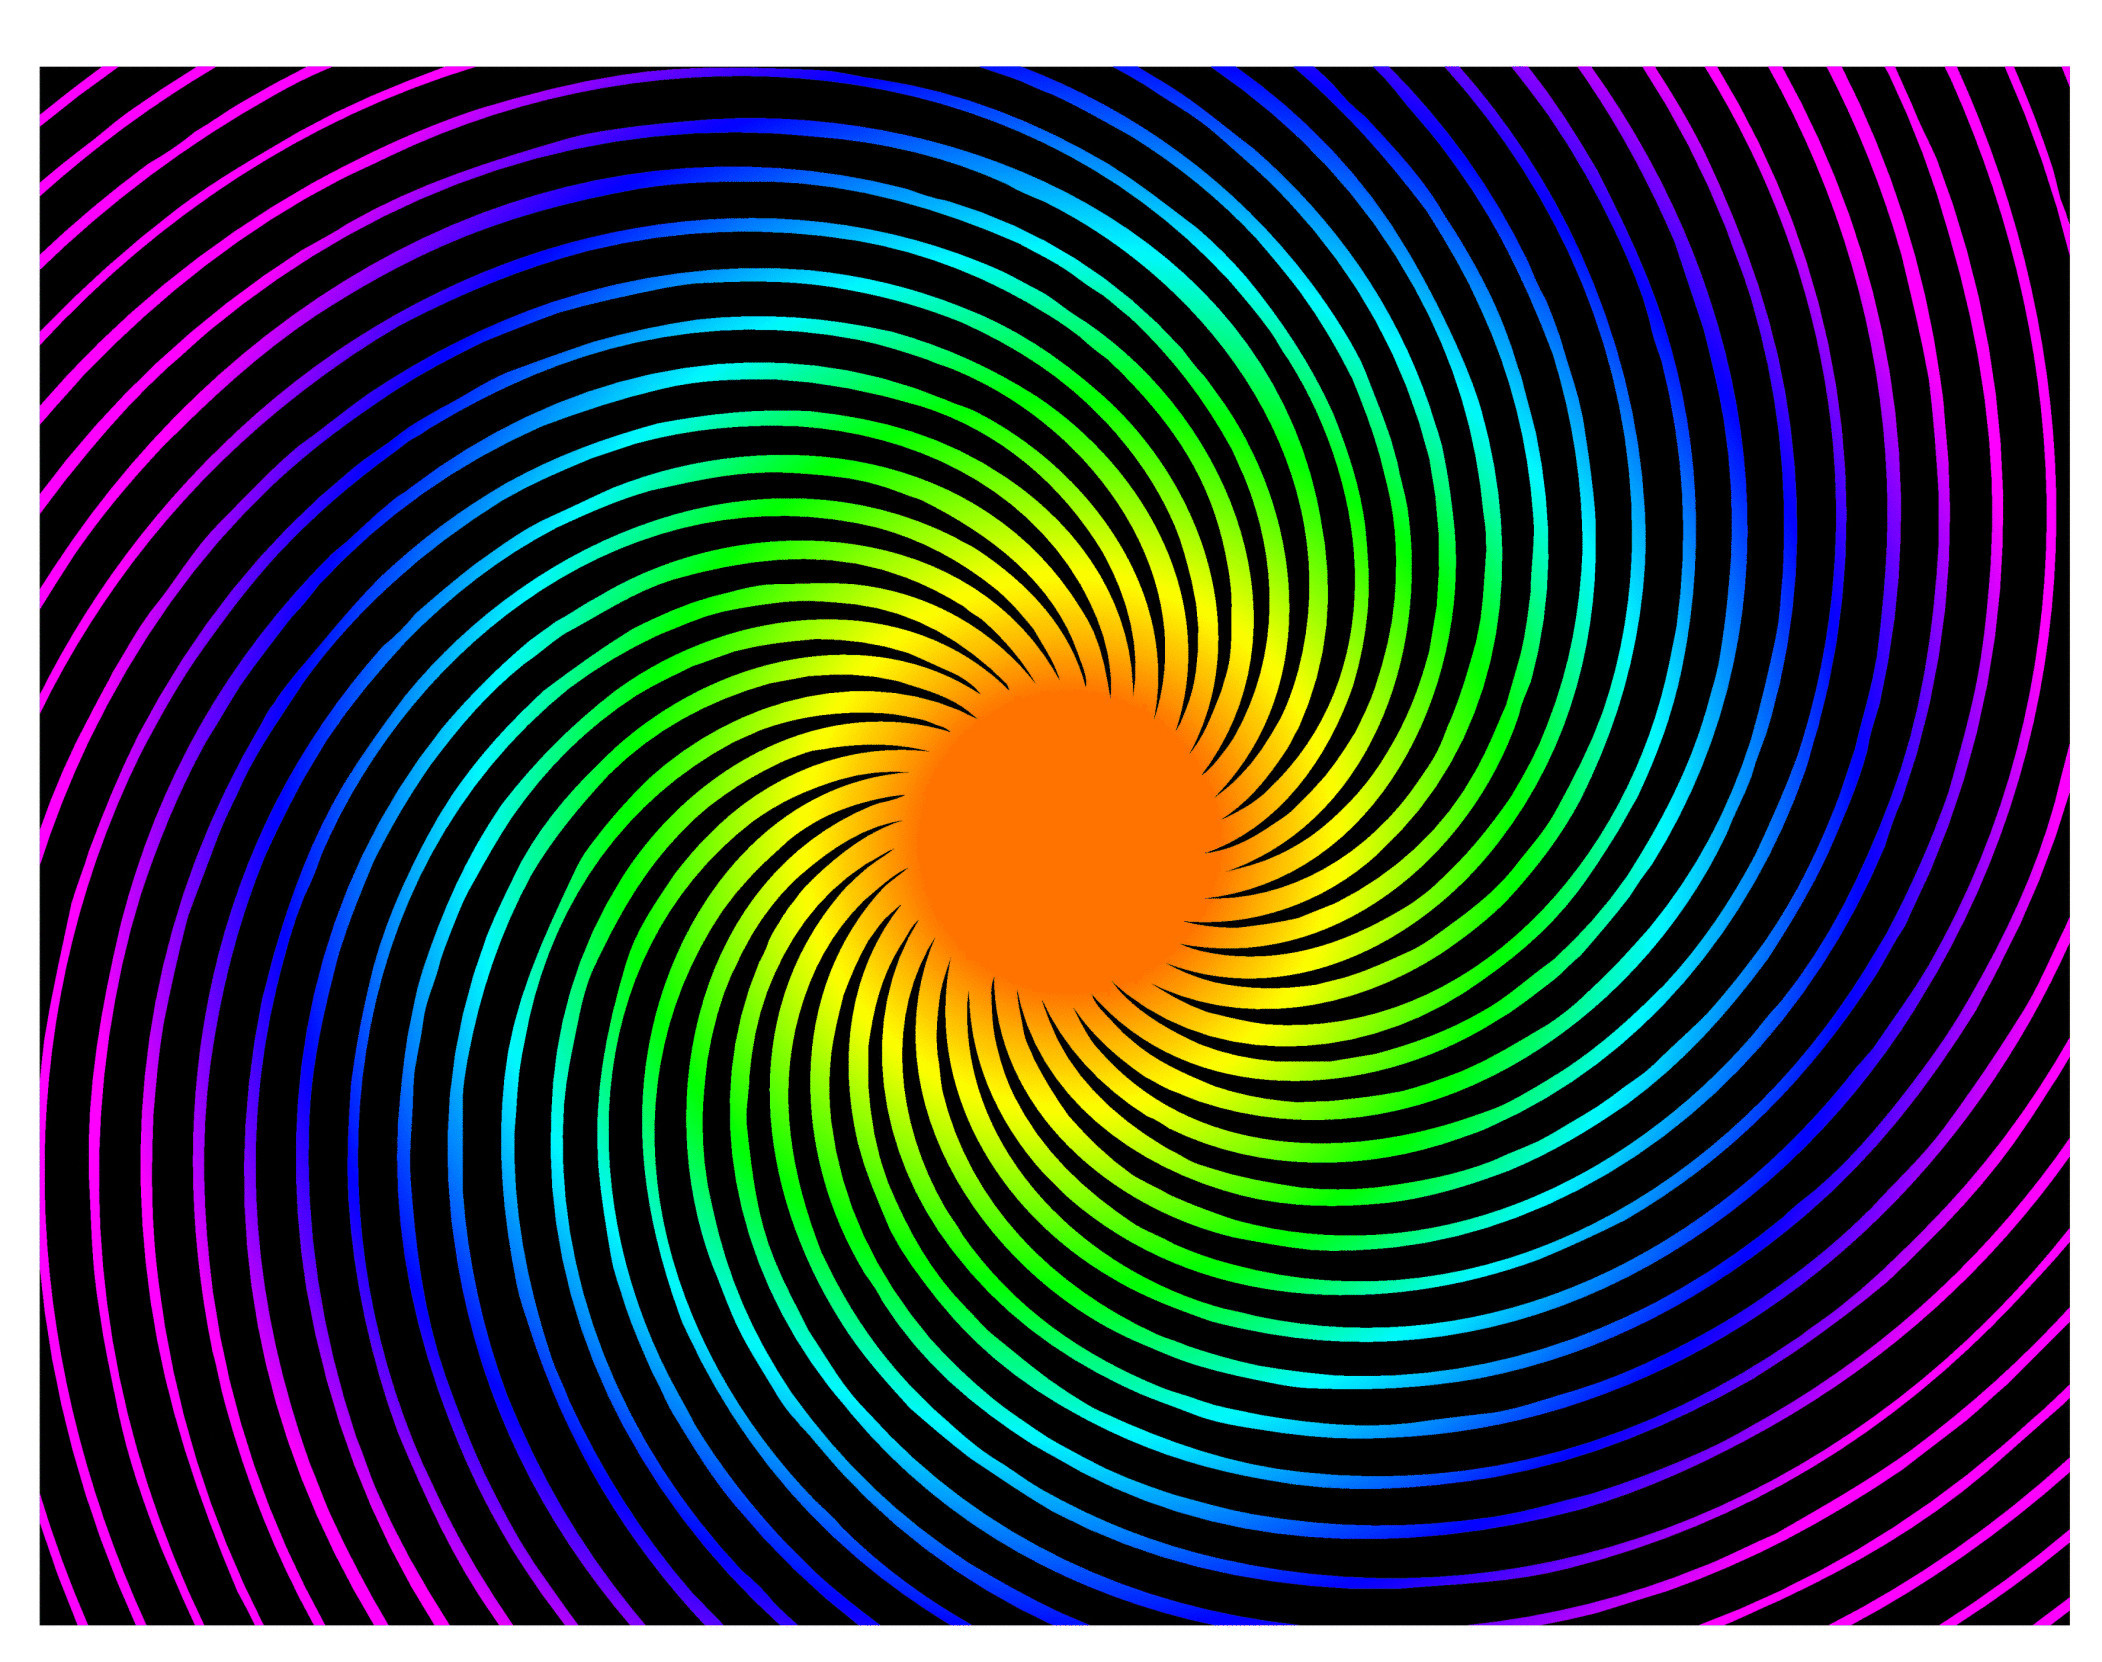 Hypnosis, Moving patterns, Mesmerizing effects, Trance-inducing visuals, 2110x1670 HD Desktop